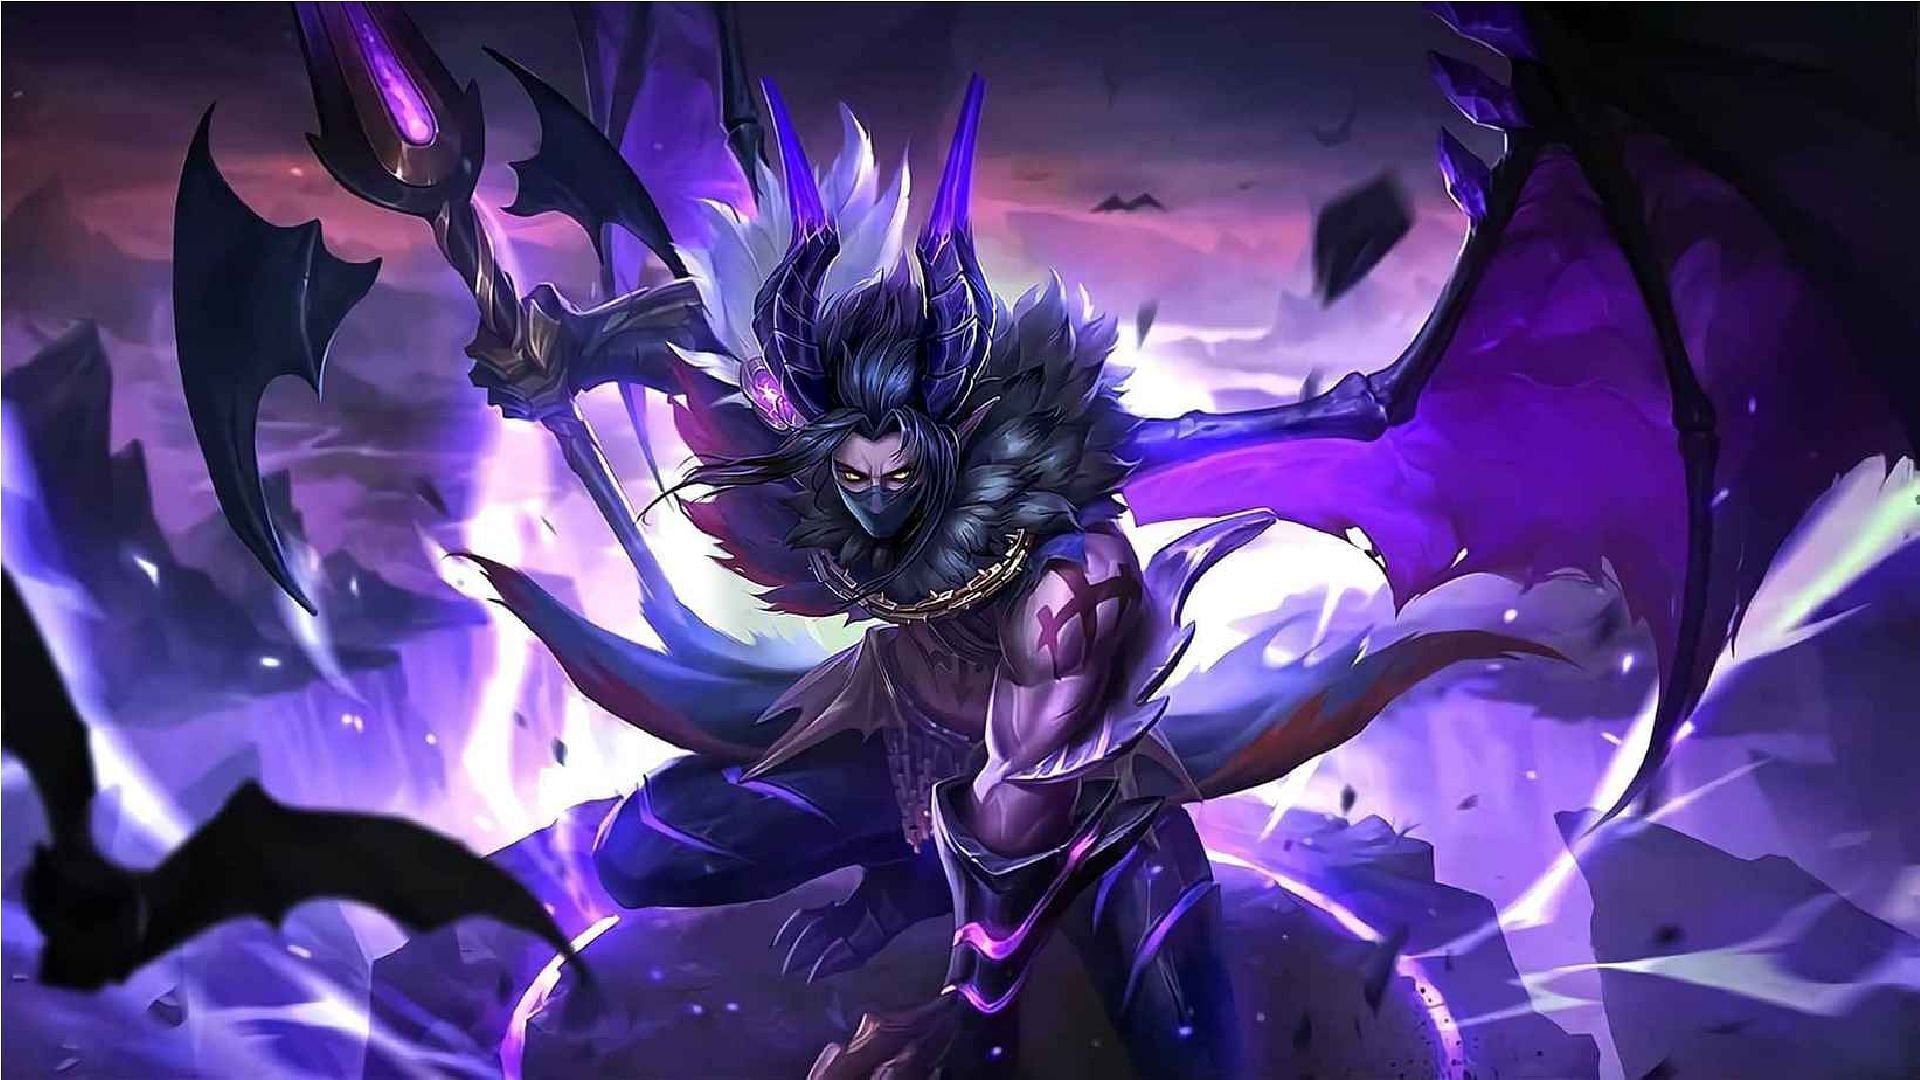 Moskov in the recent patch update is amazing (Image via Moonton Games)